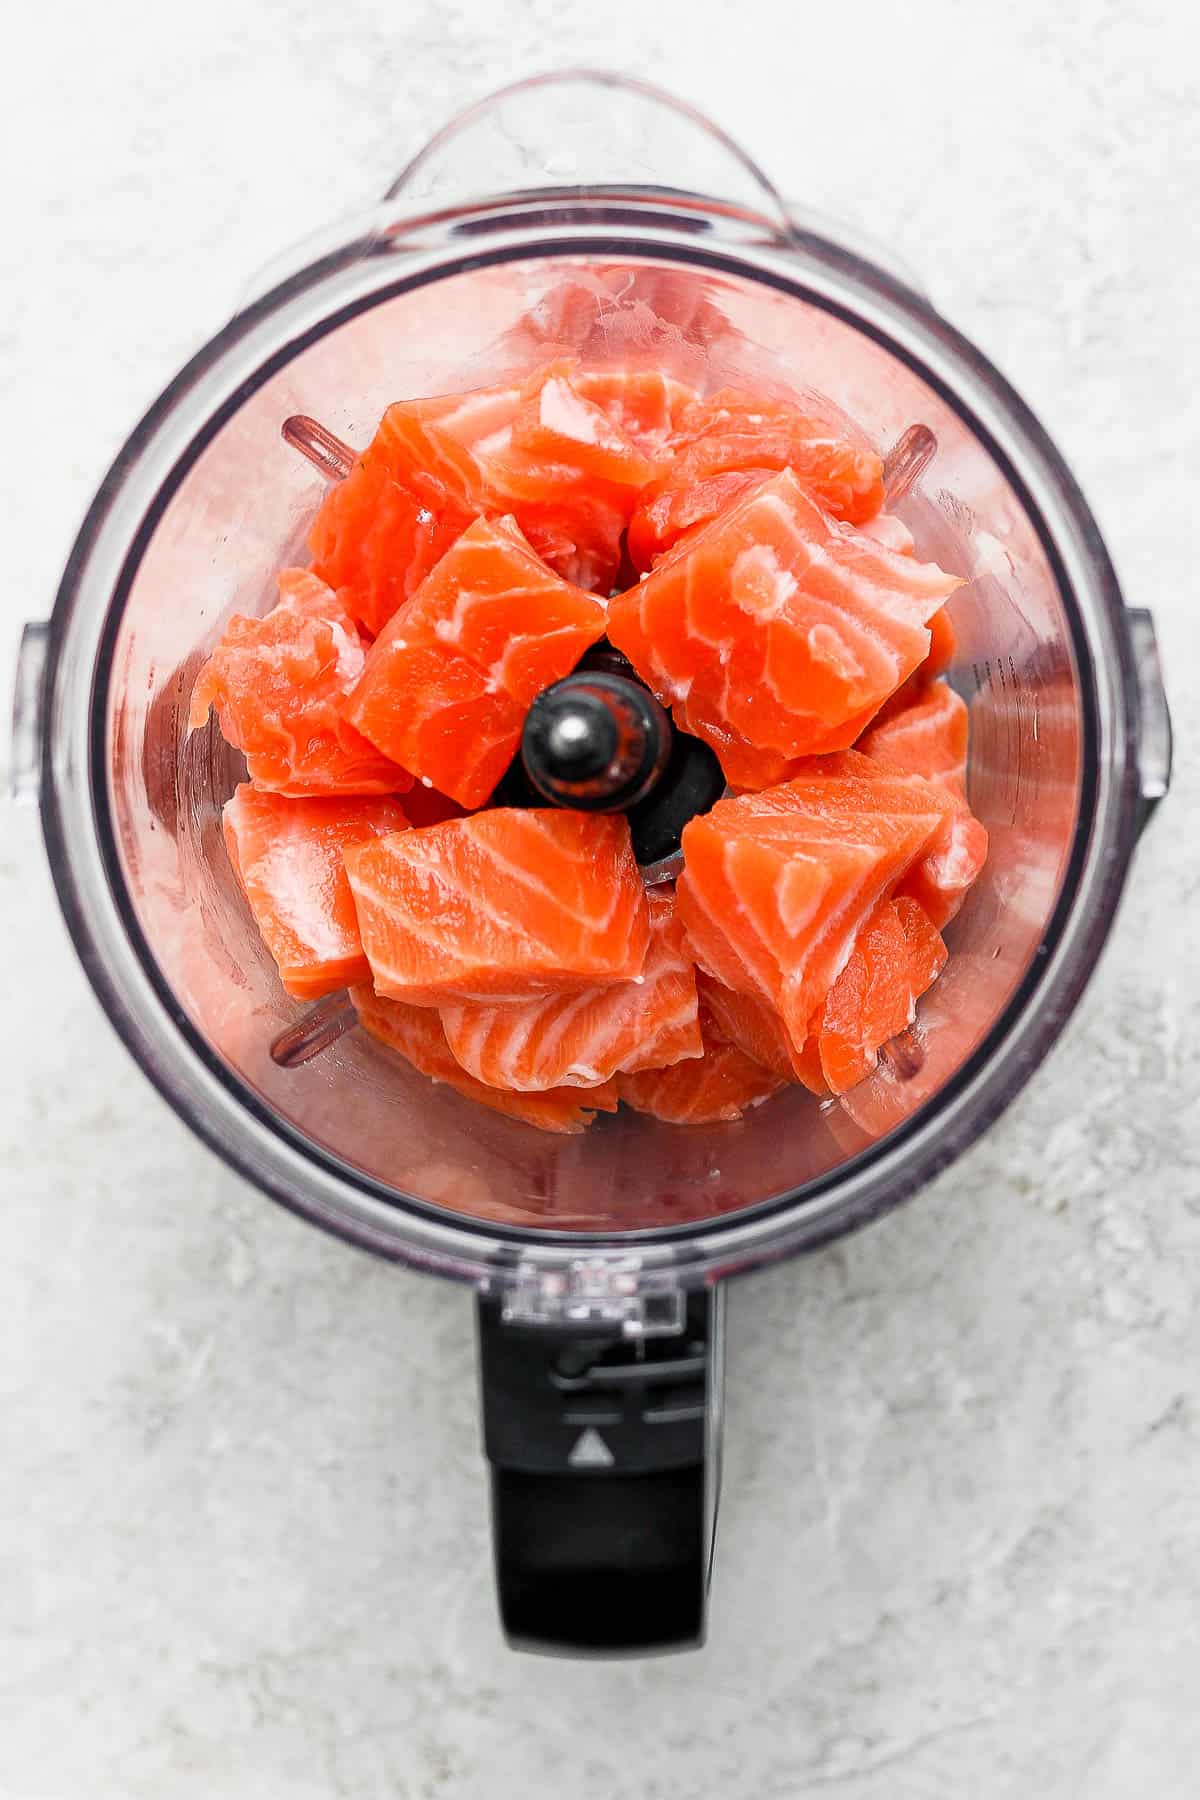 Large chunks of salmon in a food processor.